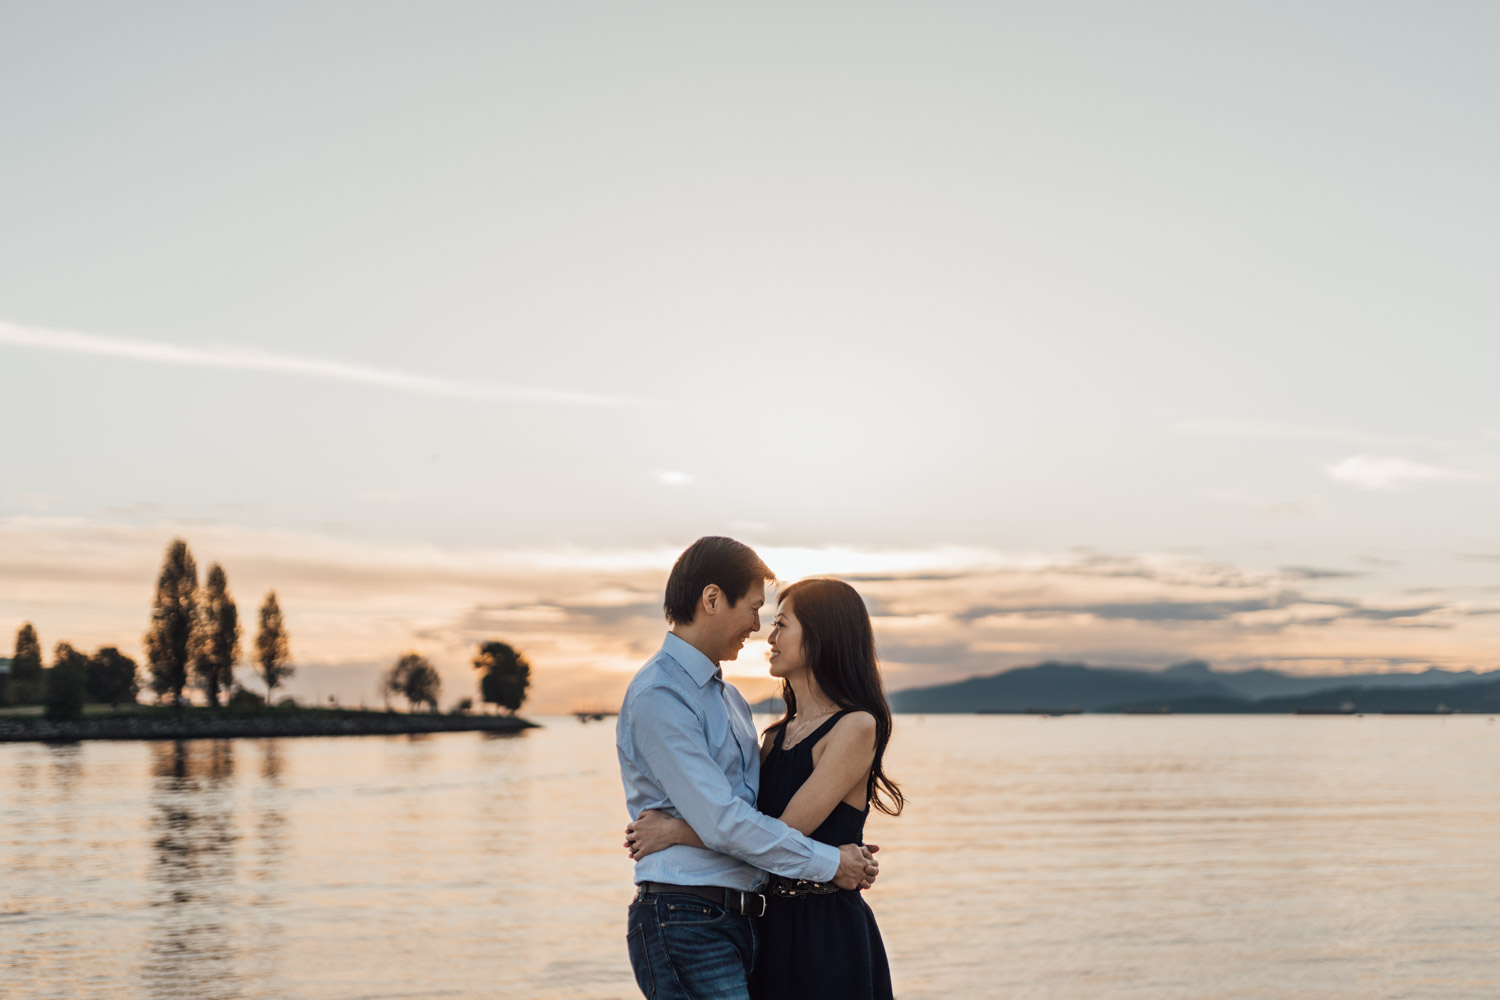 Stanley Park and Sunset Beach Engagement Photography in Vancouver, BC | Amy & Jerry